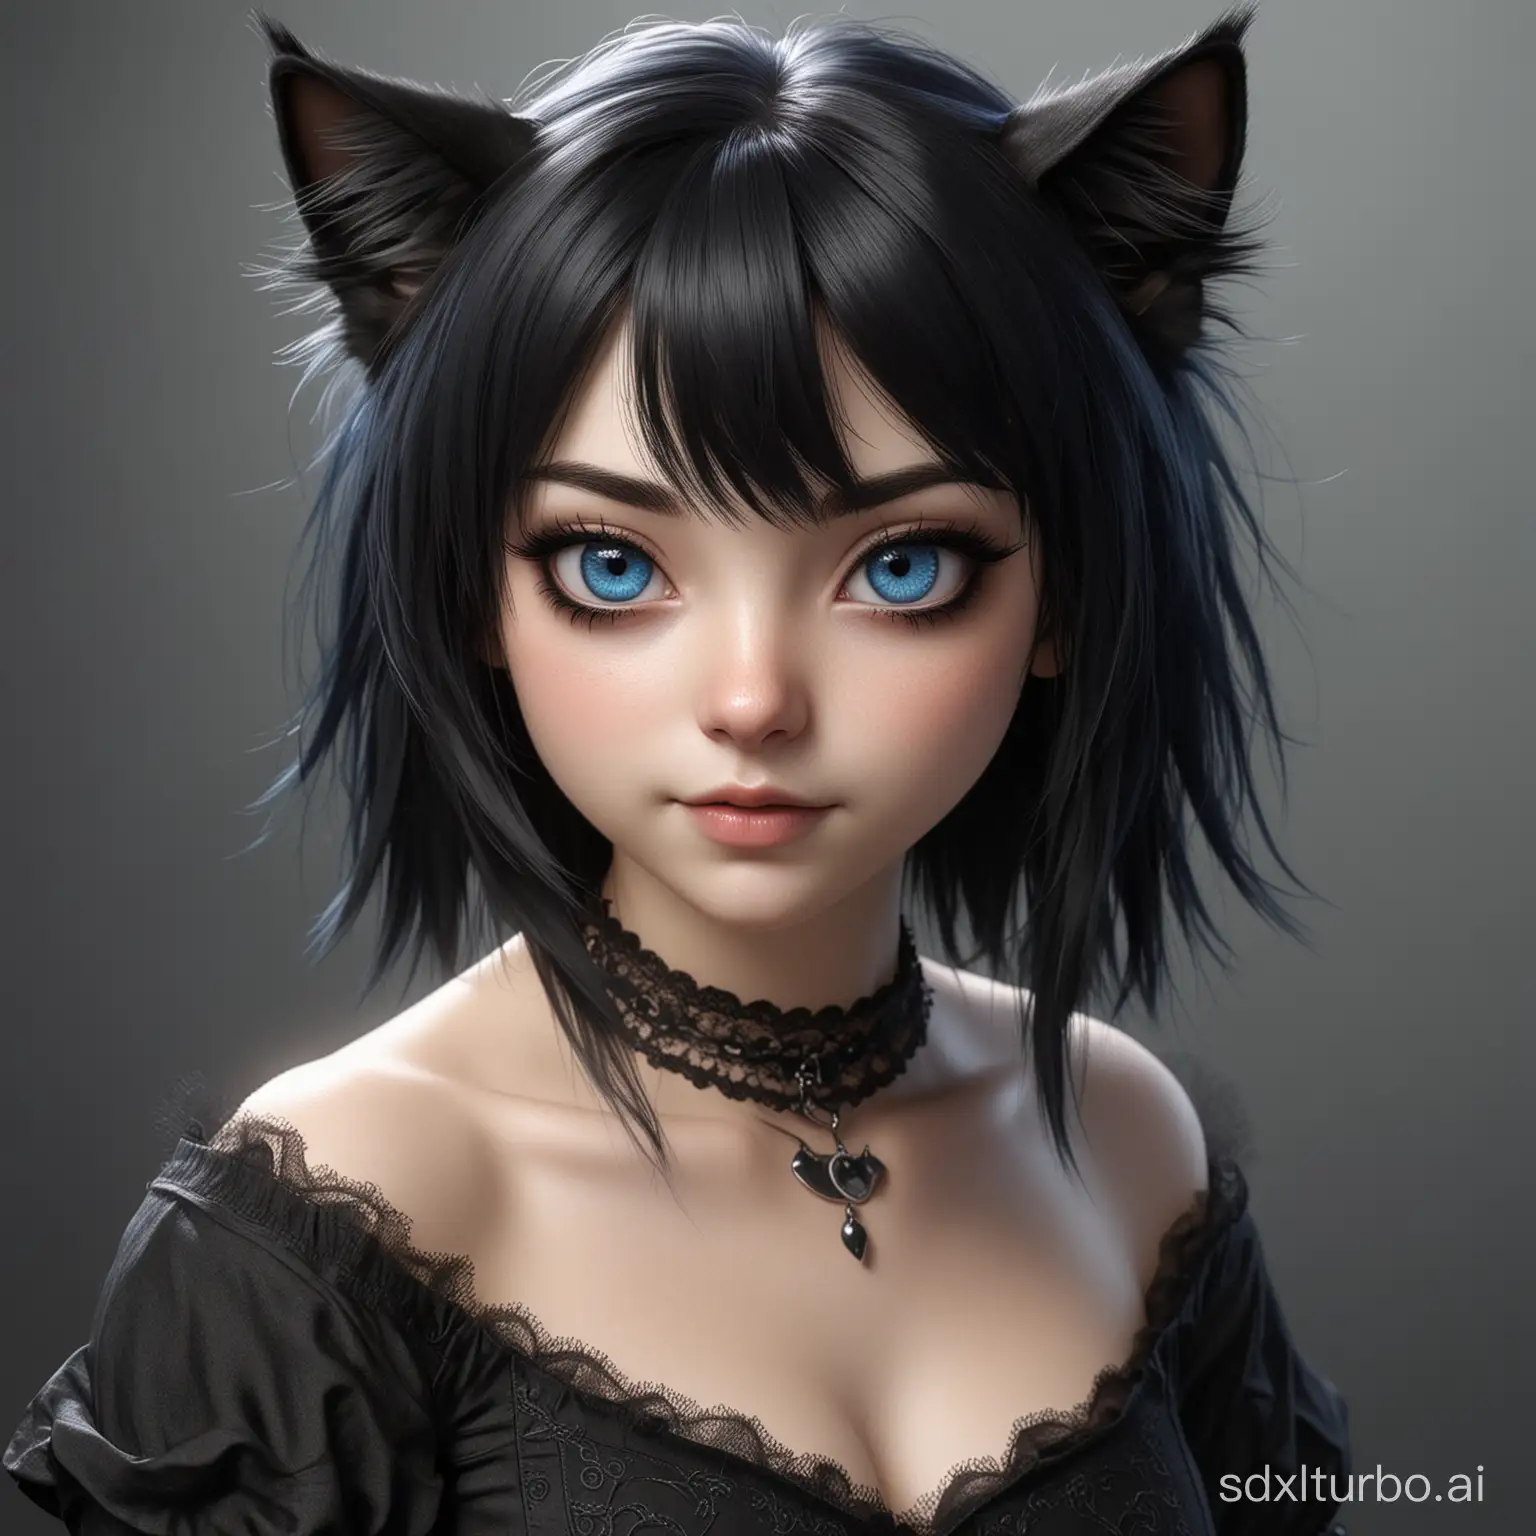 a photorealistic, furry cat-girl, with black hair, and blue eyes, she is in gothic style, she looks less anime or cartoon-like, she looks more real-world like